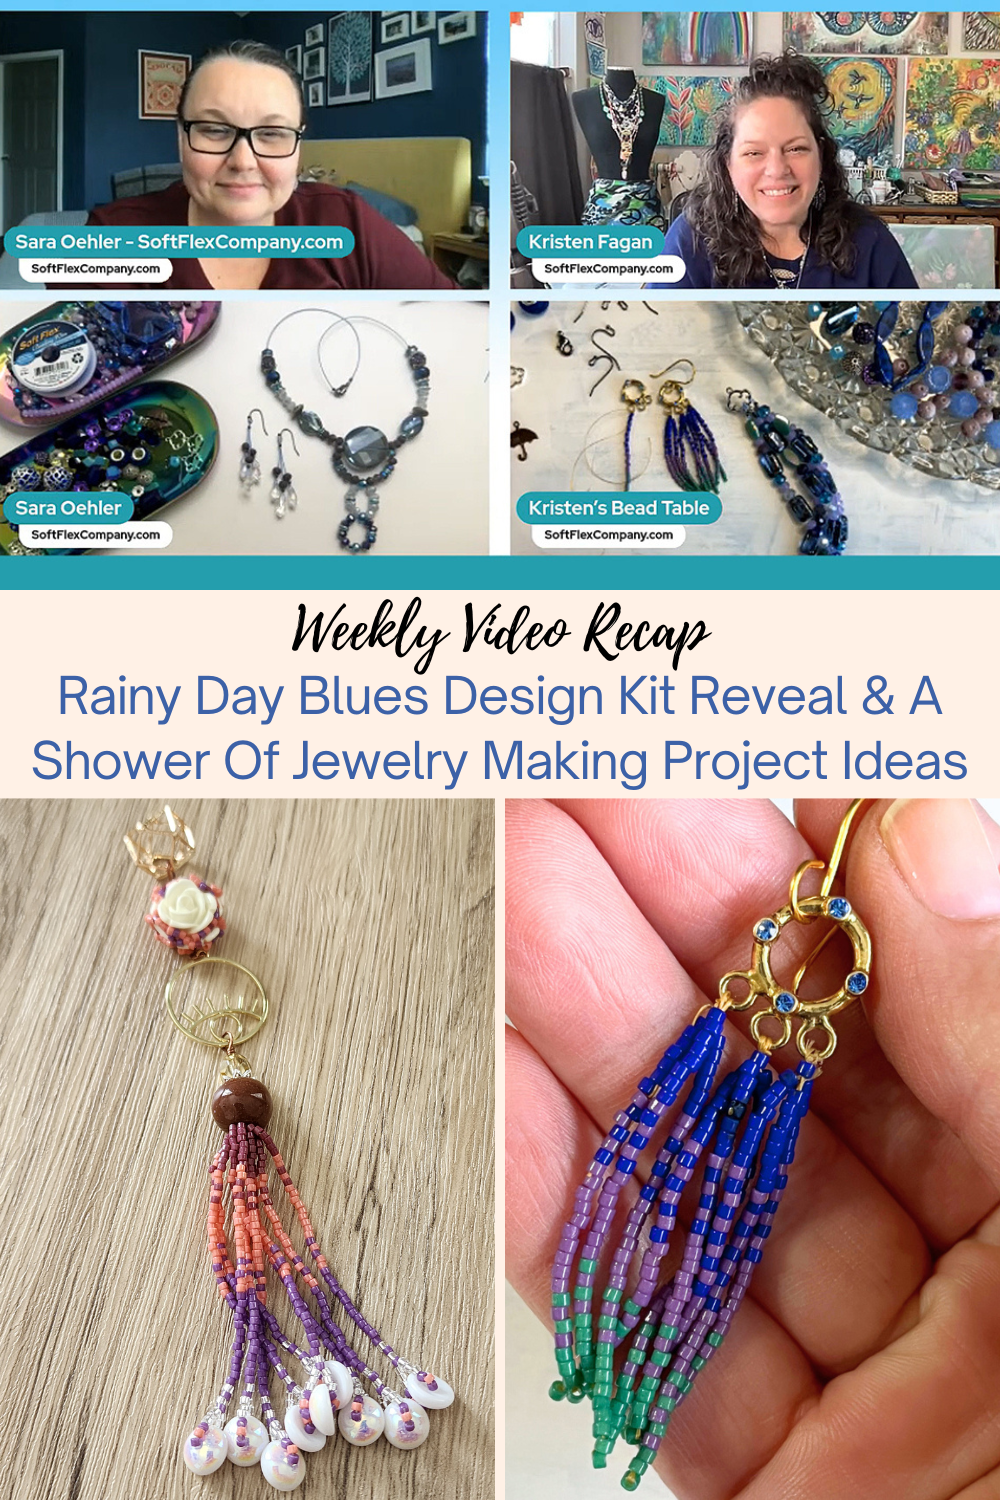 Rainy Day Blues Design Kit Reveal & A Shower Of Jewelry Making Project Ideas Collage